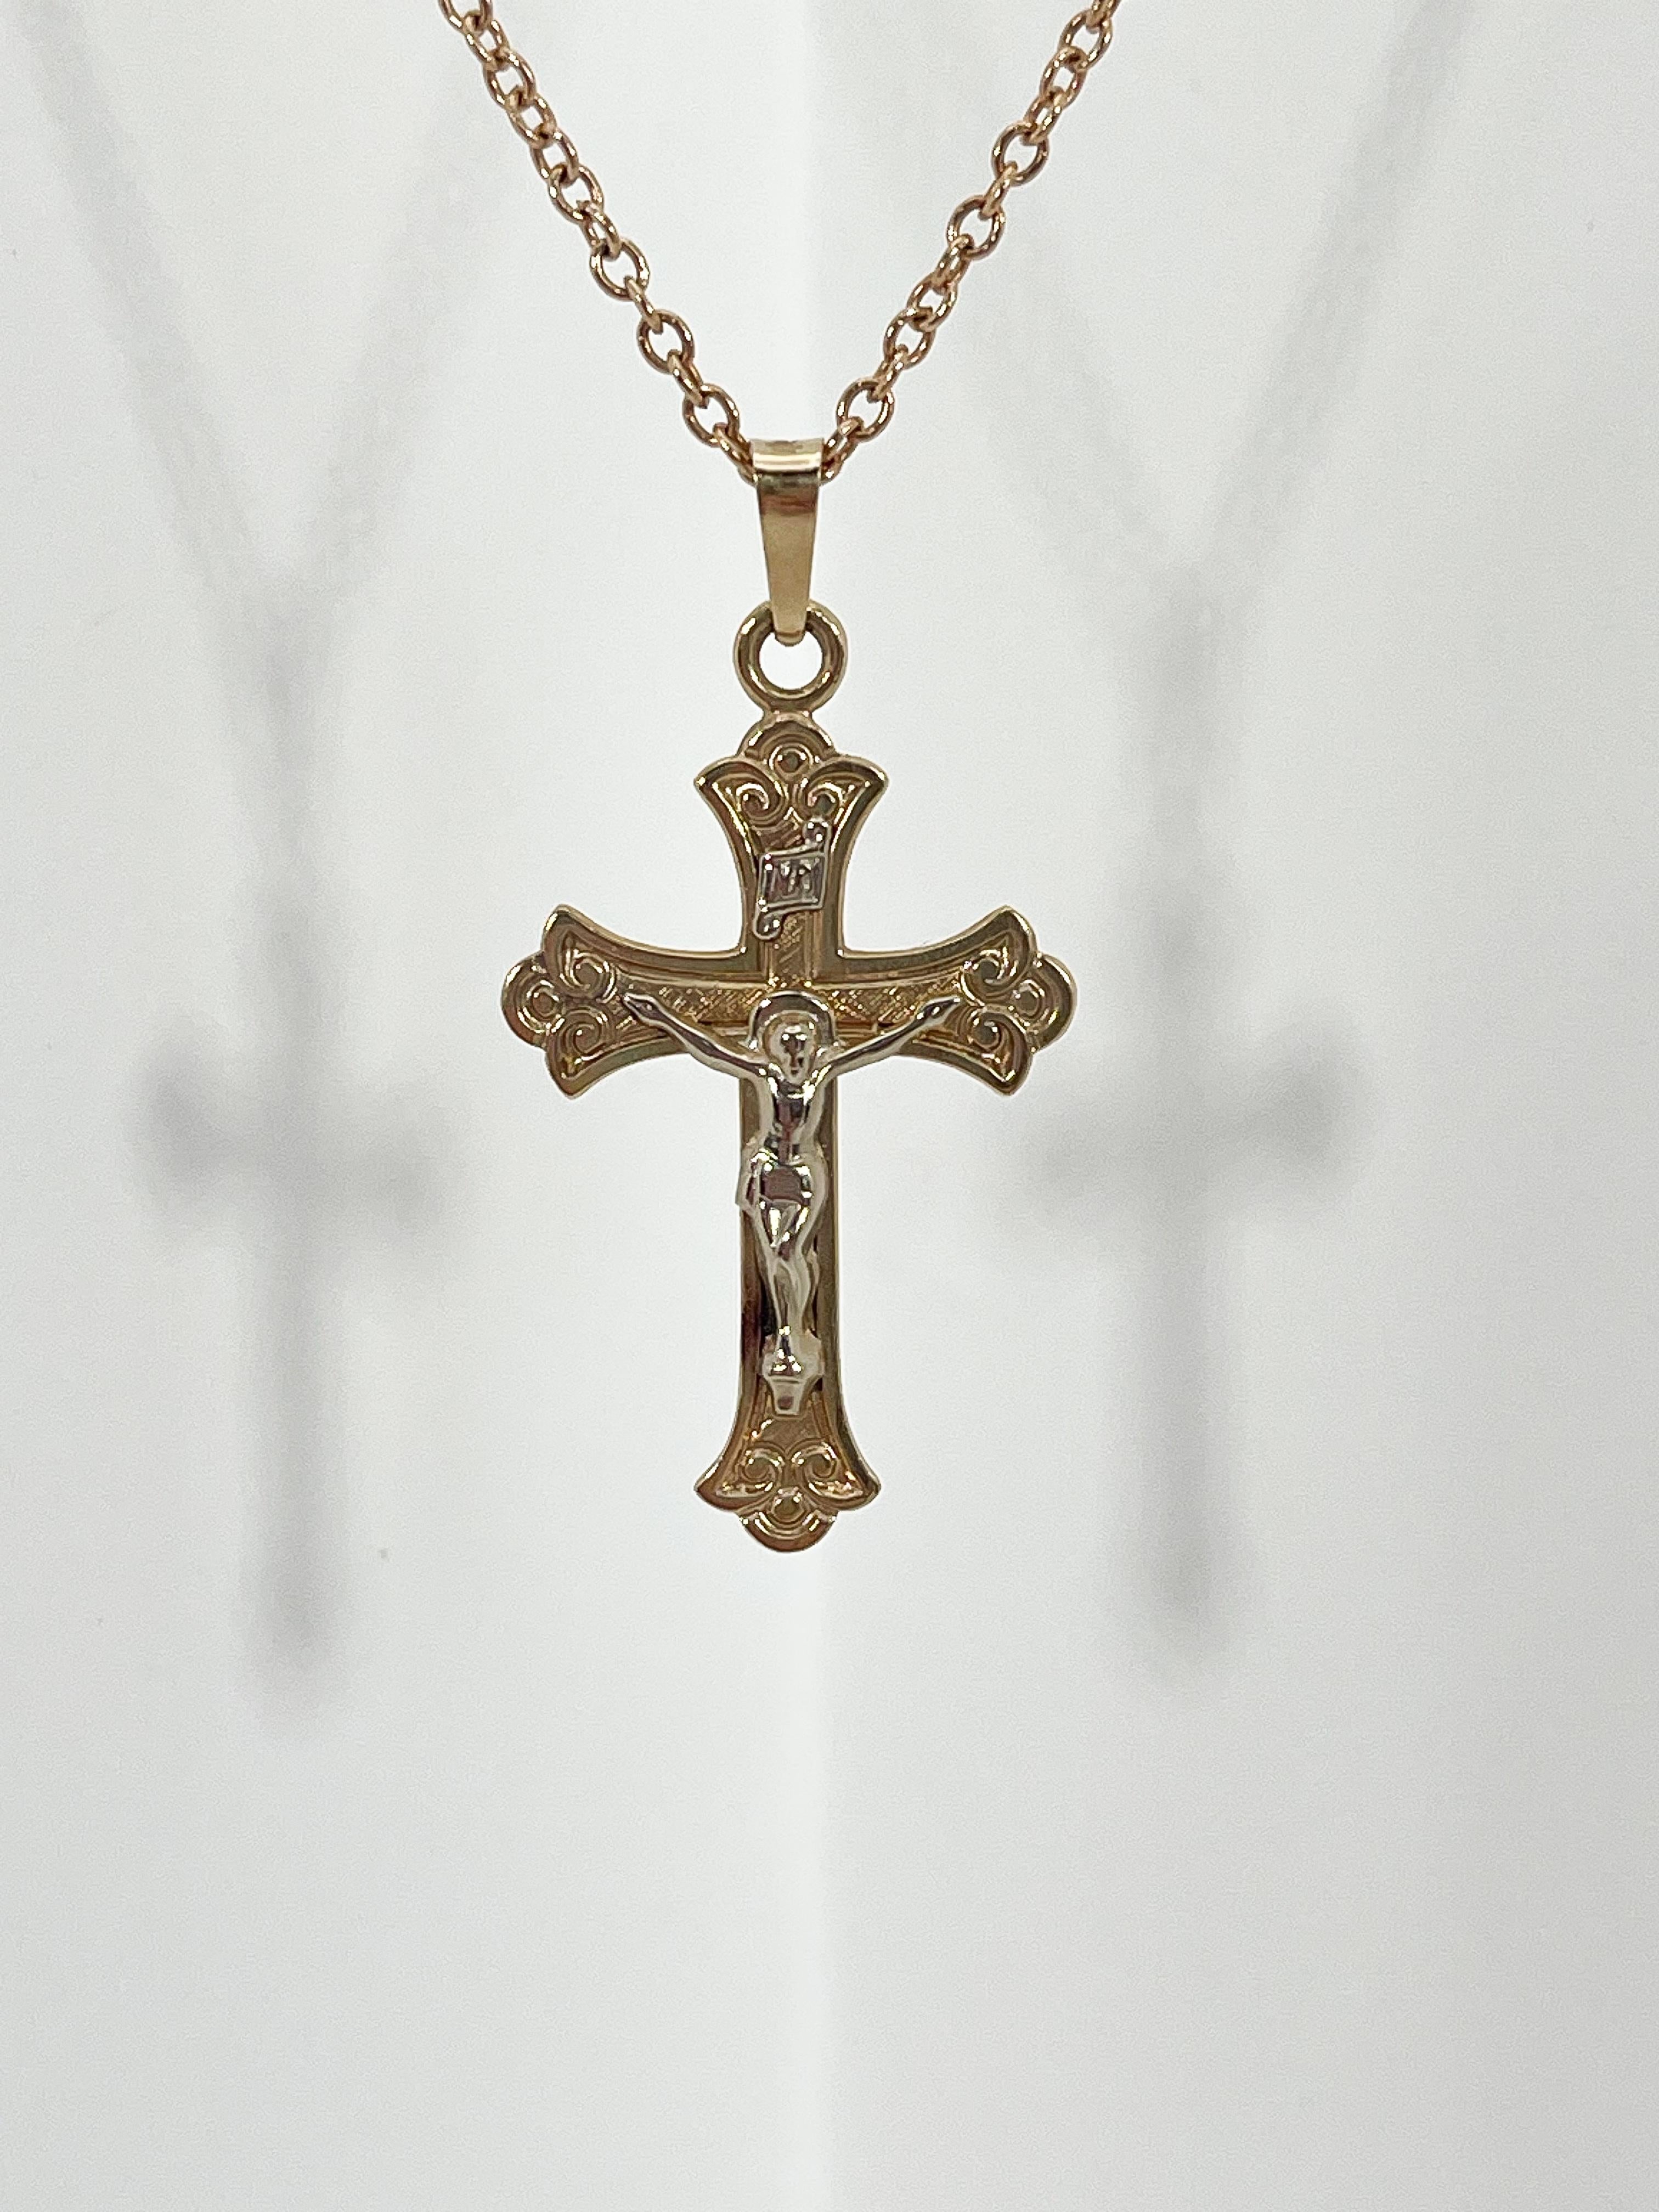 14K Yellow Gold Crucifix Pendant Necklace  In Excellent Condition For Sale In Stuart, FL